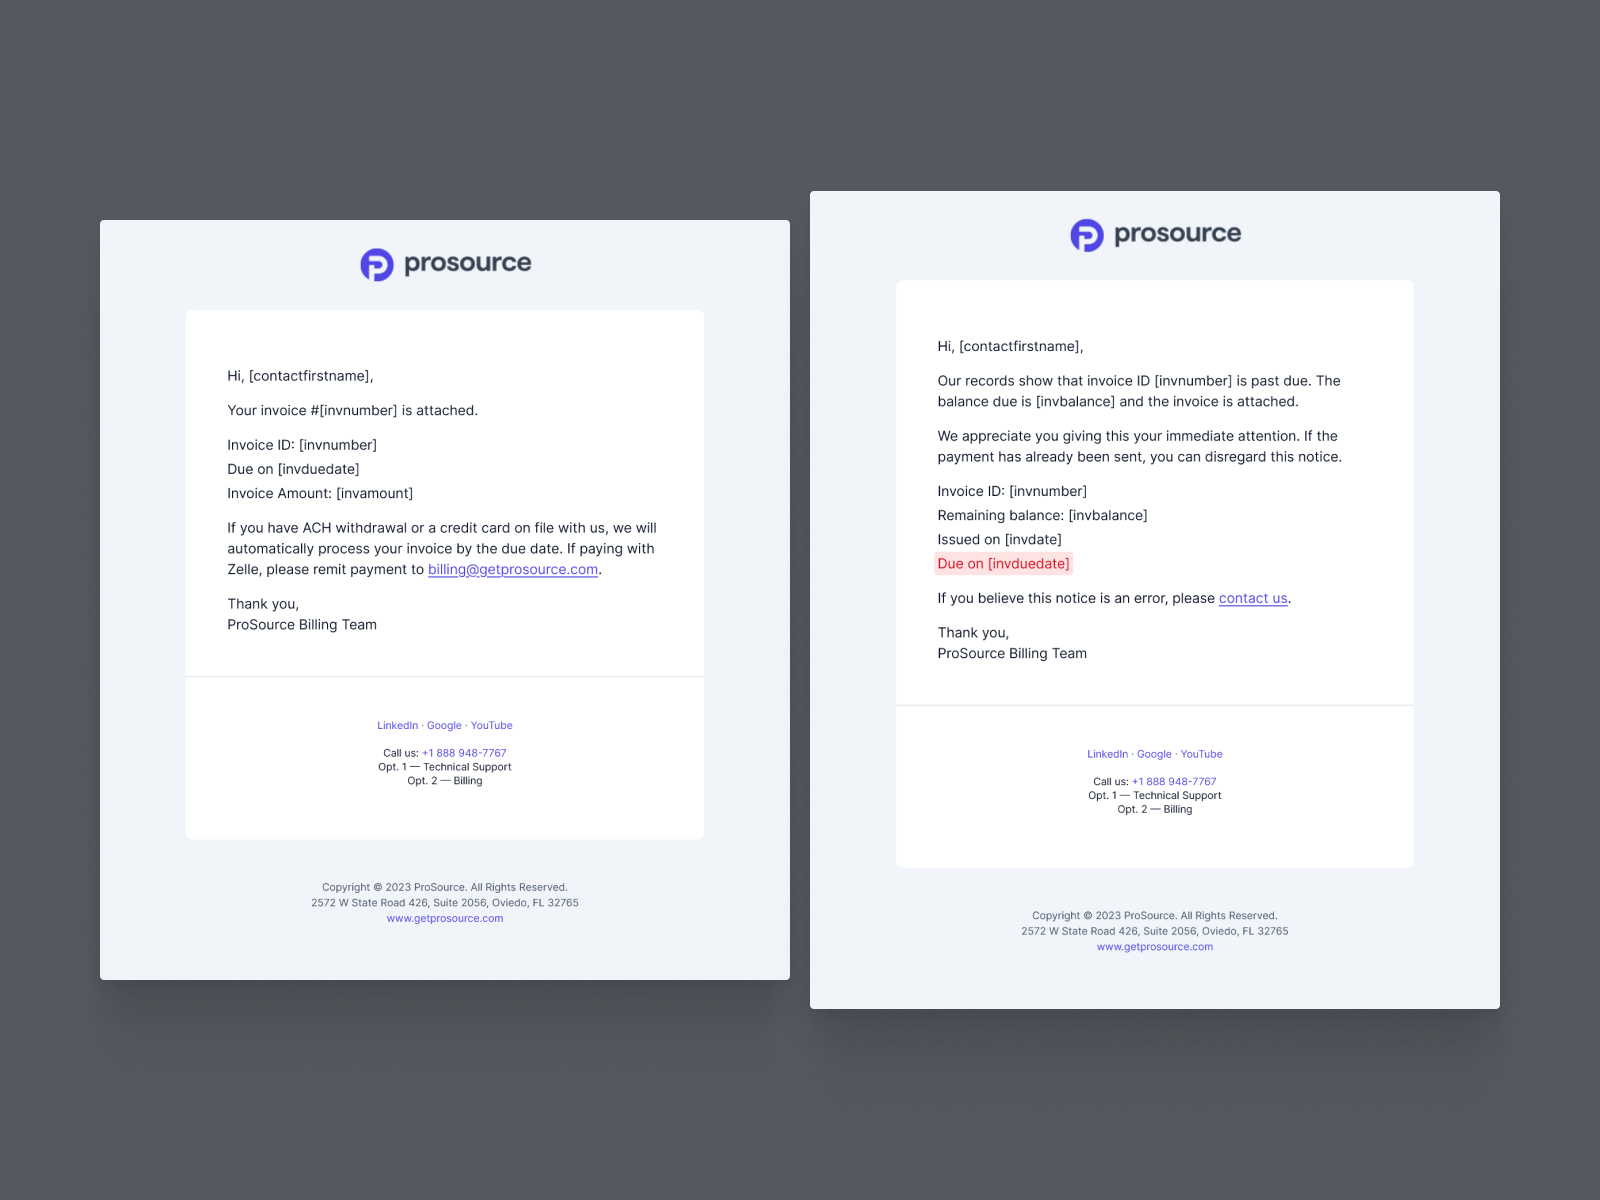 Dribbble shot of the ProSource Invoice Email Templates 2023 post.